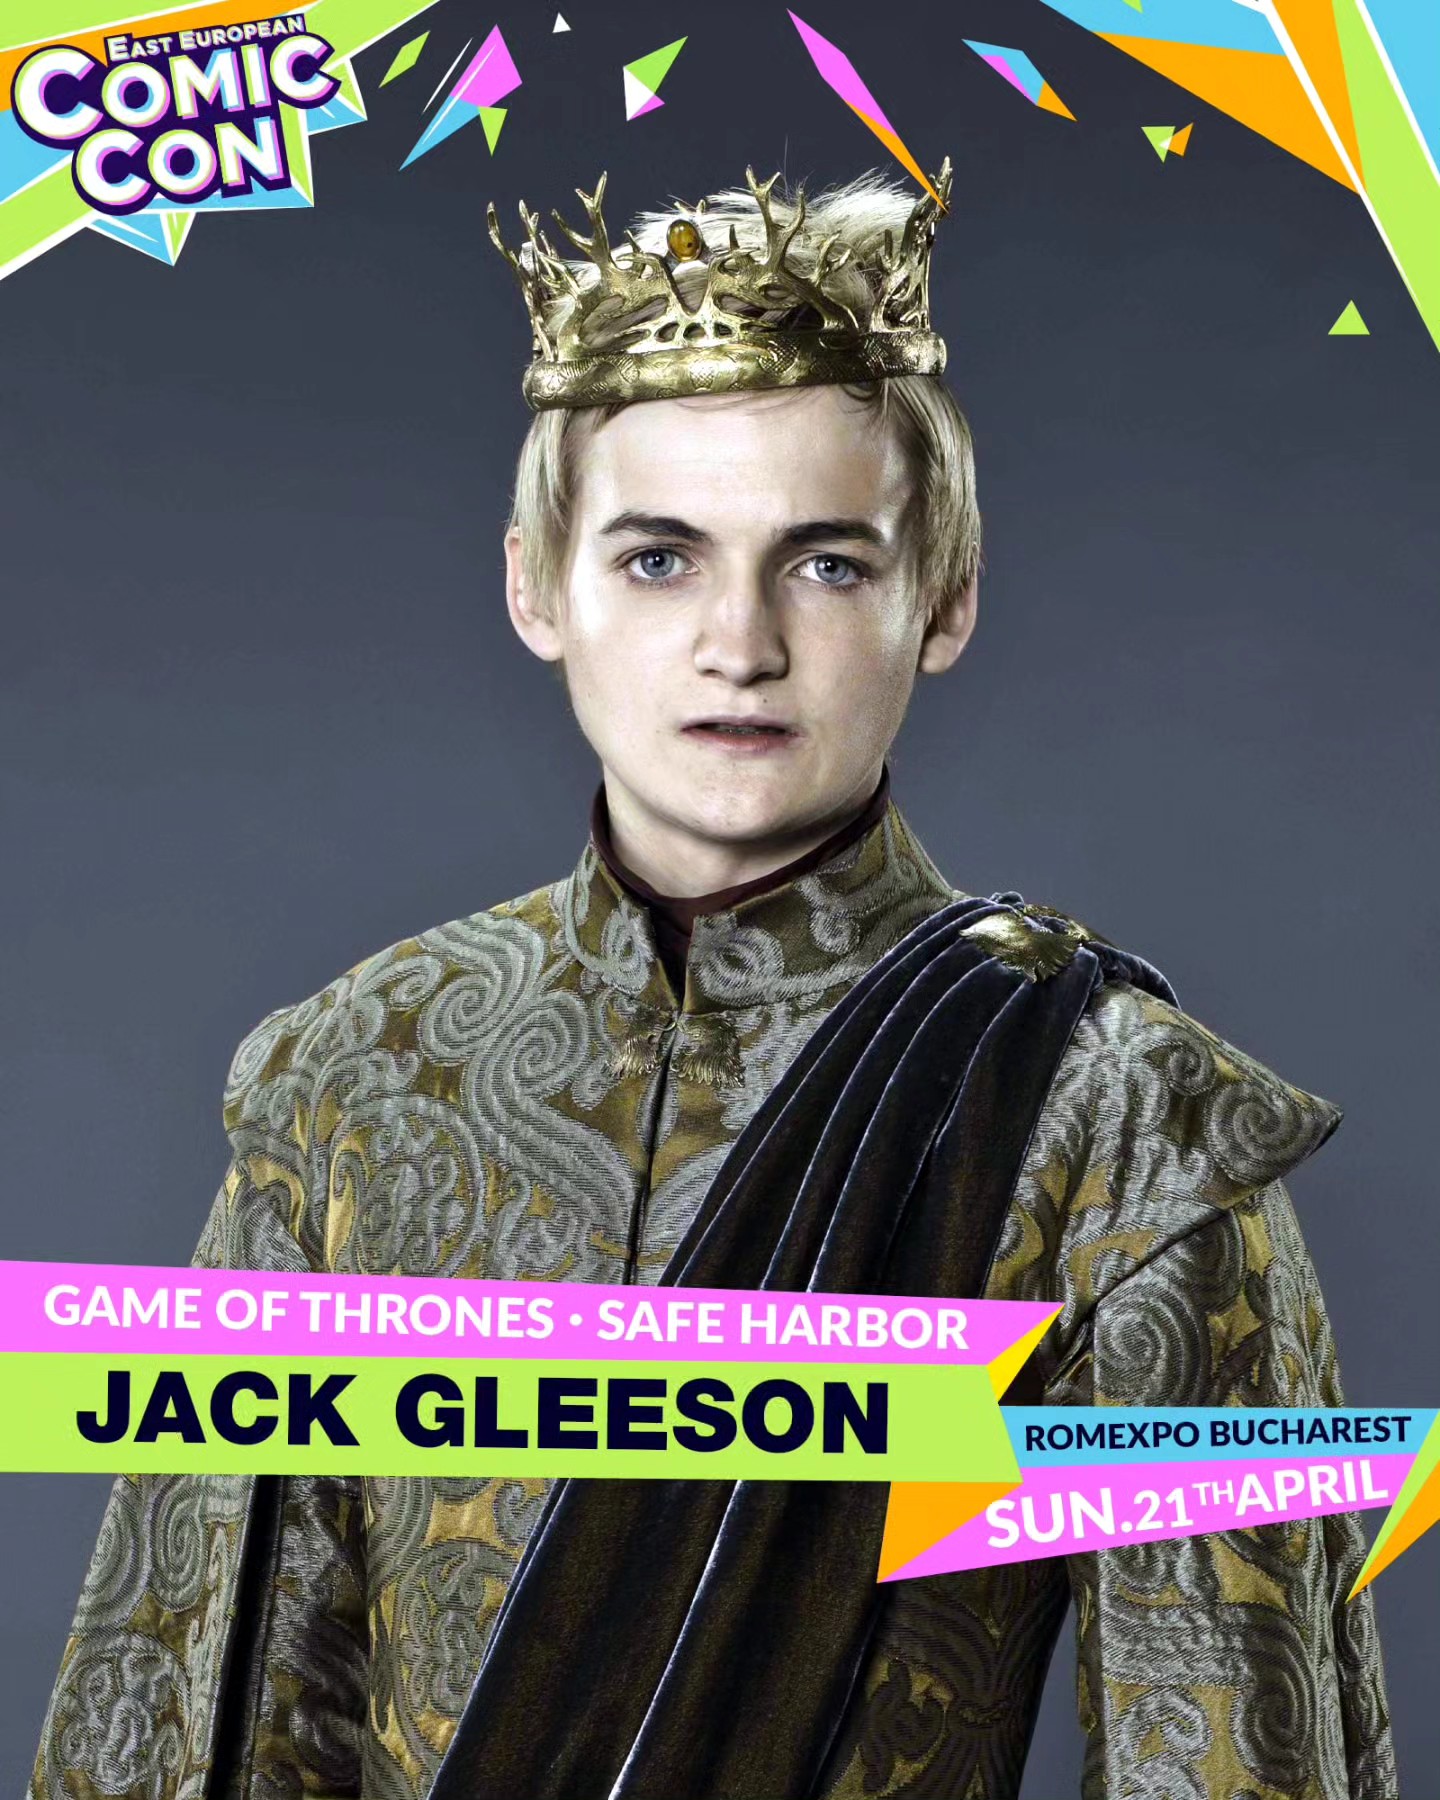 Game of Thrones actor Jack Gleeson unveiled as guest for Comic Con in Bucharest